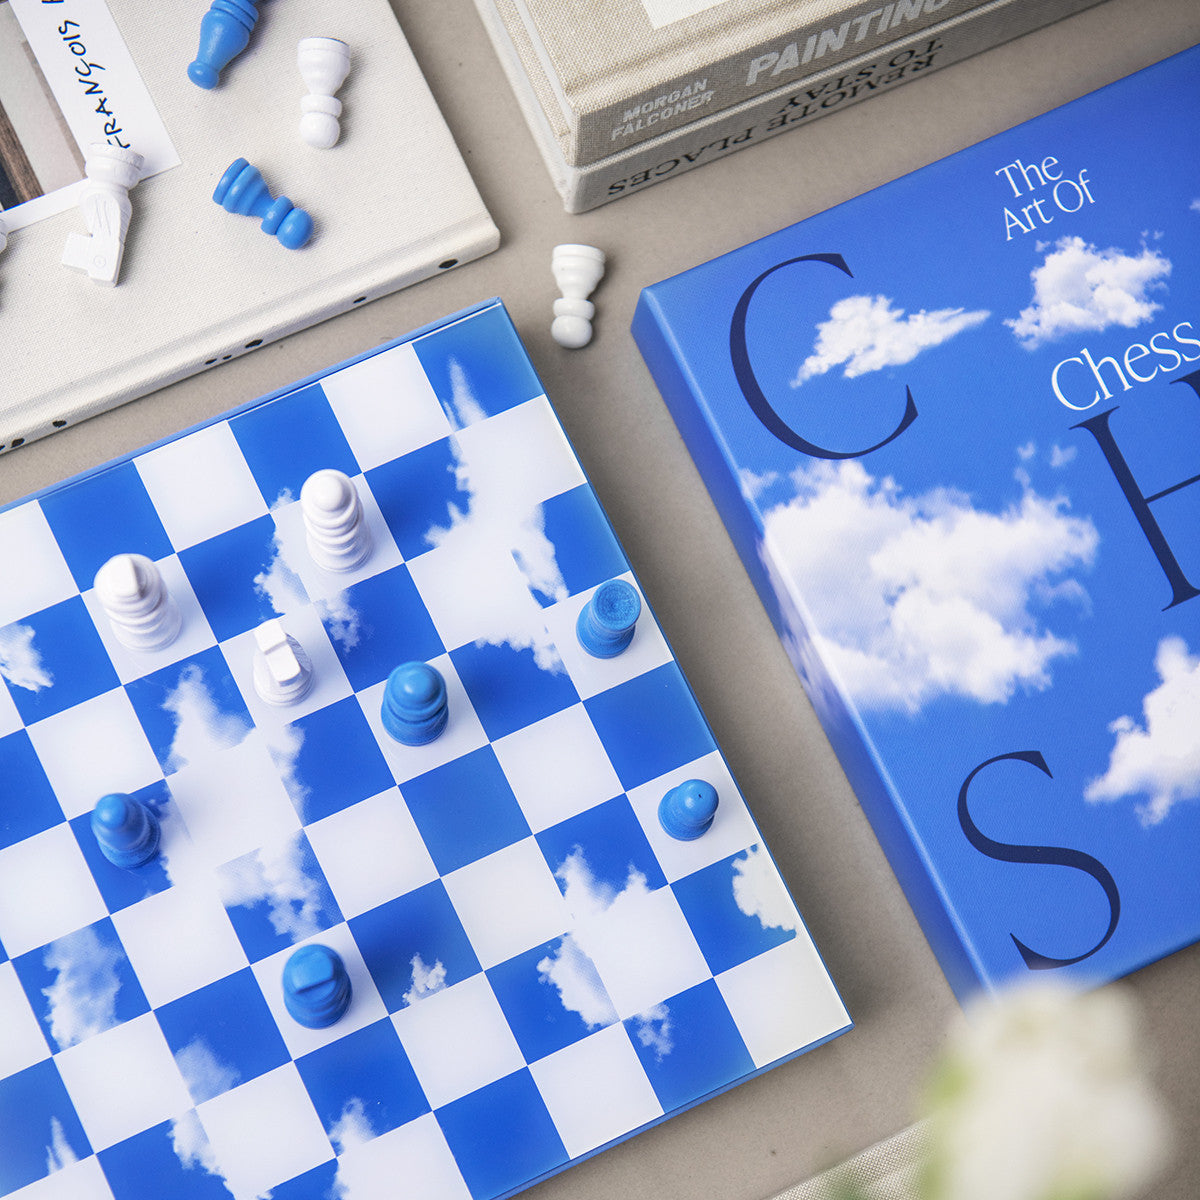 Printworks: Art of Chess - Clouds